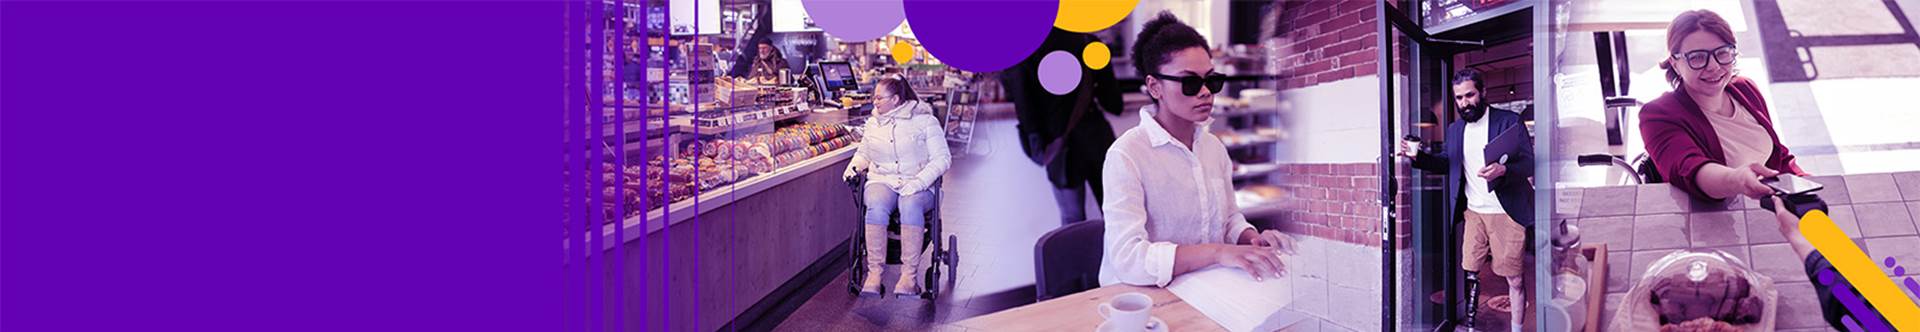 A collection of images showcasing diverse individuals with disabilities: a girl in a wheelchair looking at goods in a store, a blind person reading braille at a coffee shop, a man with a prosthetic leg walking through a door, and a woman in a wheelchair paying for goods.